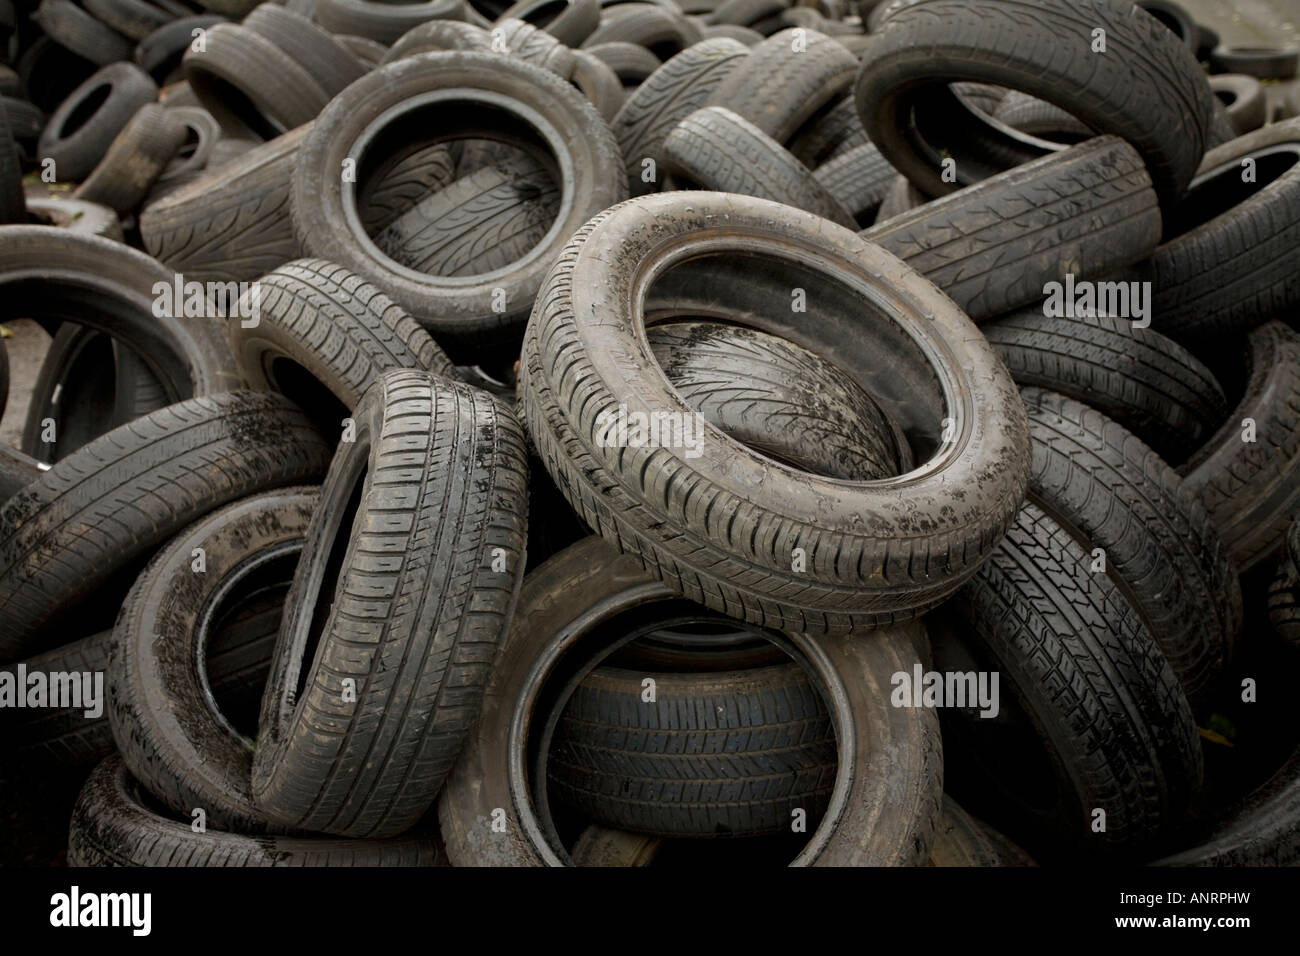 Fly tipping illegal dumping of tyres along the banks of the Clyde in Glasgow Strathclyde Scotland UK Stock Photo